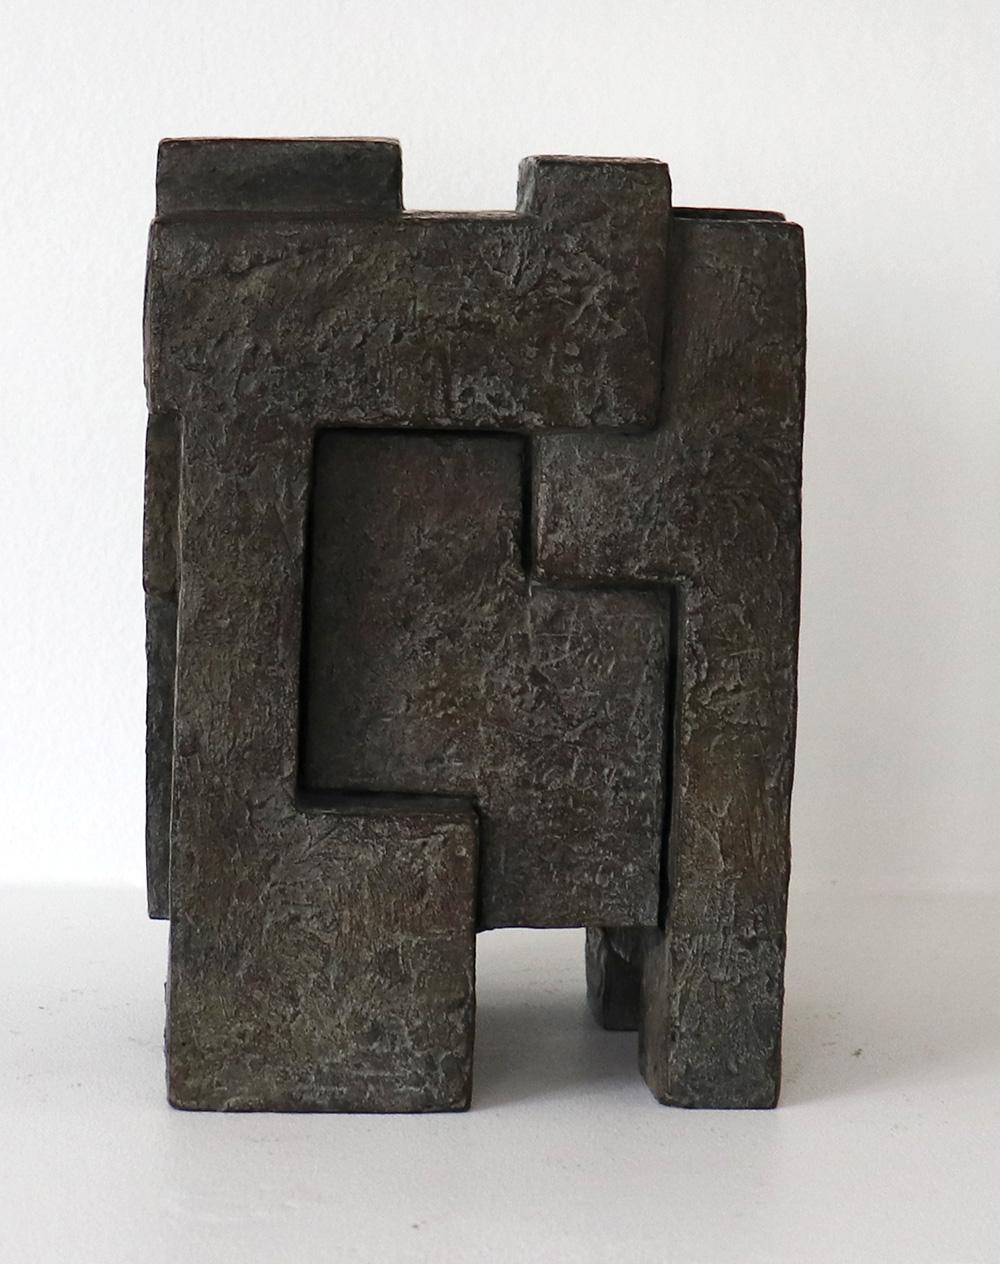 Block XI by Delphine Brabant - Abstract geometric bronze sculpture For Sale 2